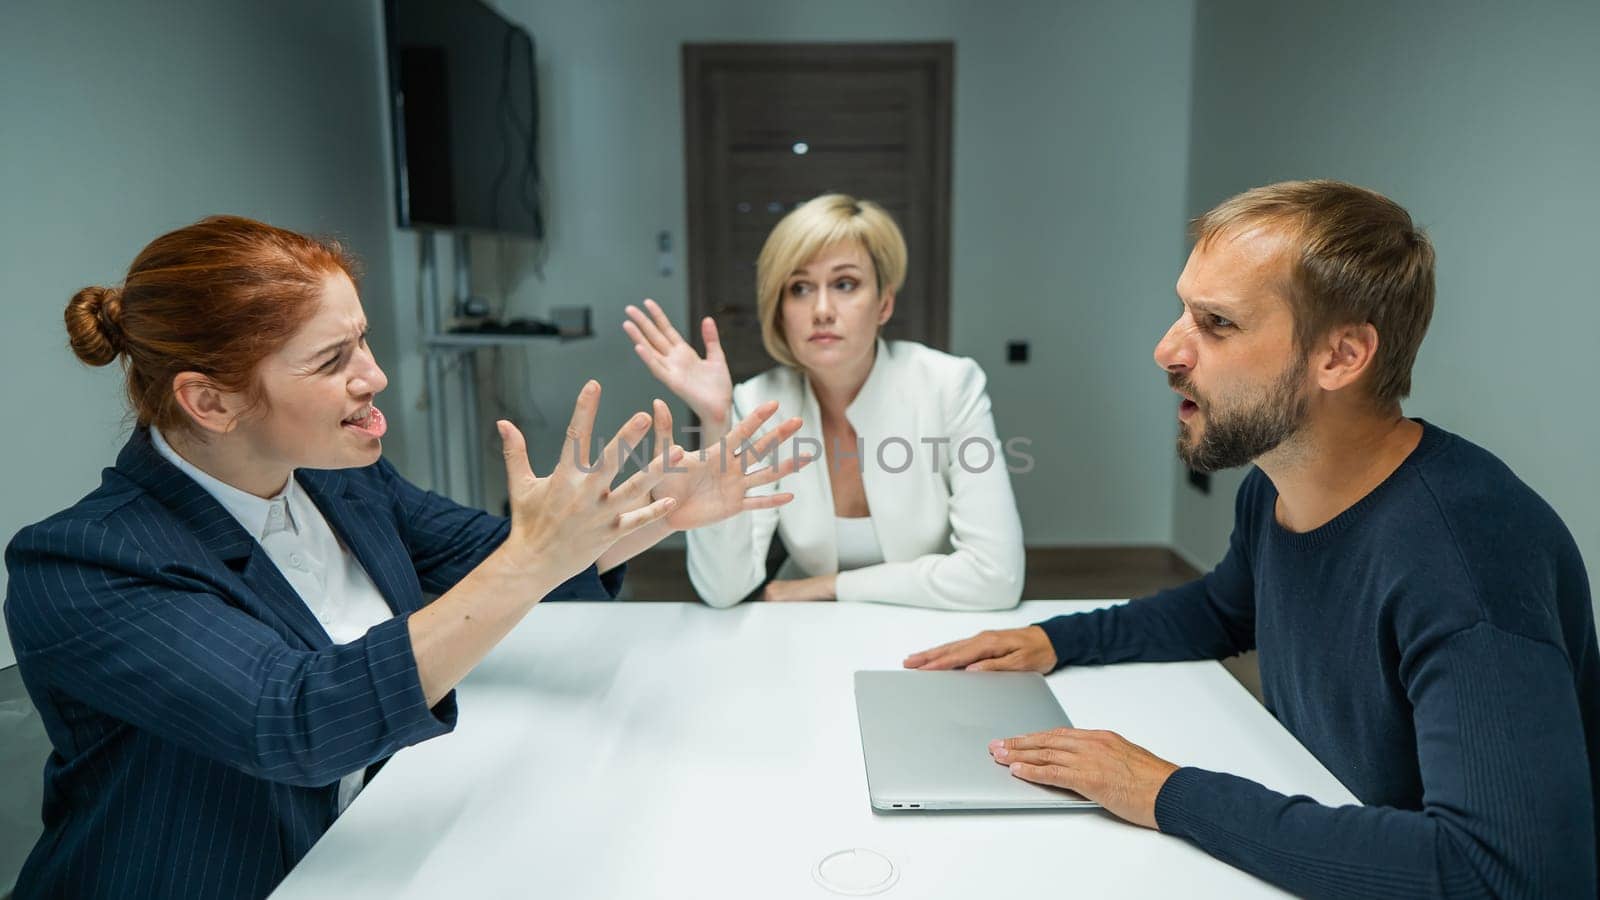 Blond, red-haired woman and bearded man in suits in the office. Business people are swearing during negotiations in the conference room. by mrwed54